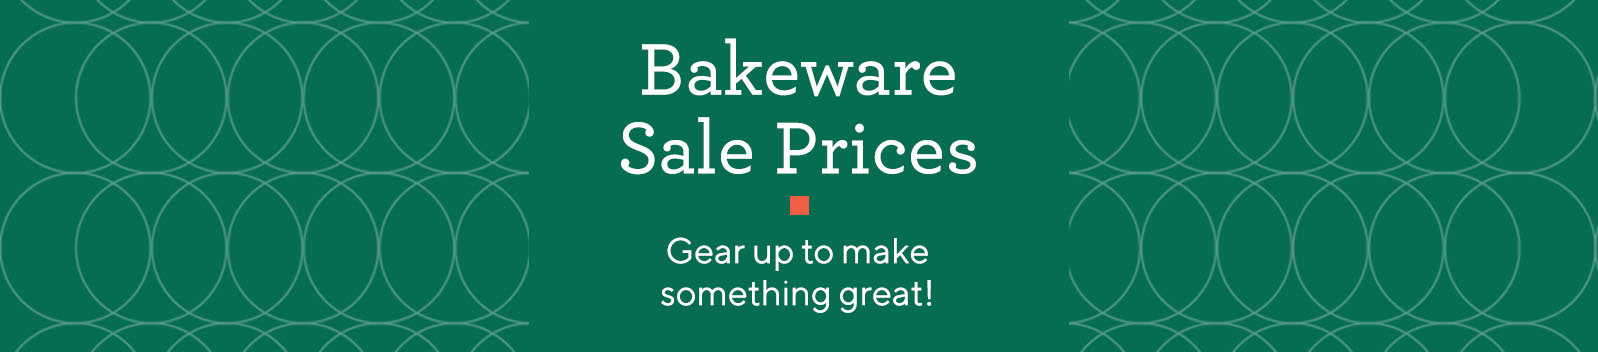 Bakeware Sale Prices  Gear up to make something great!